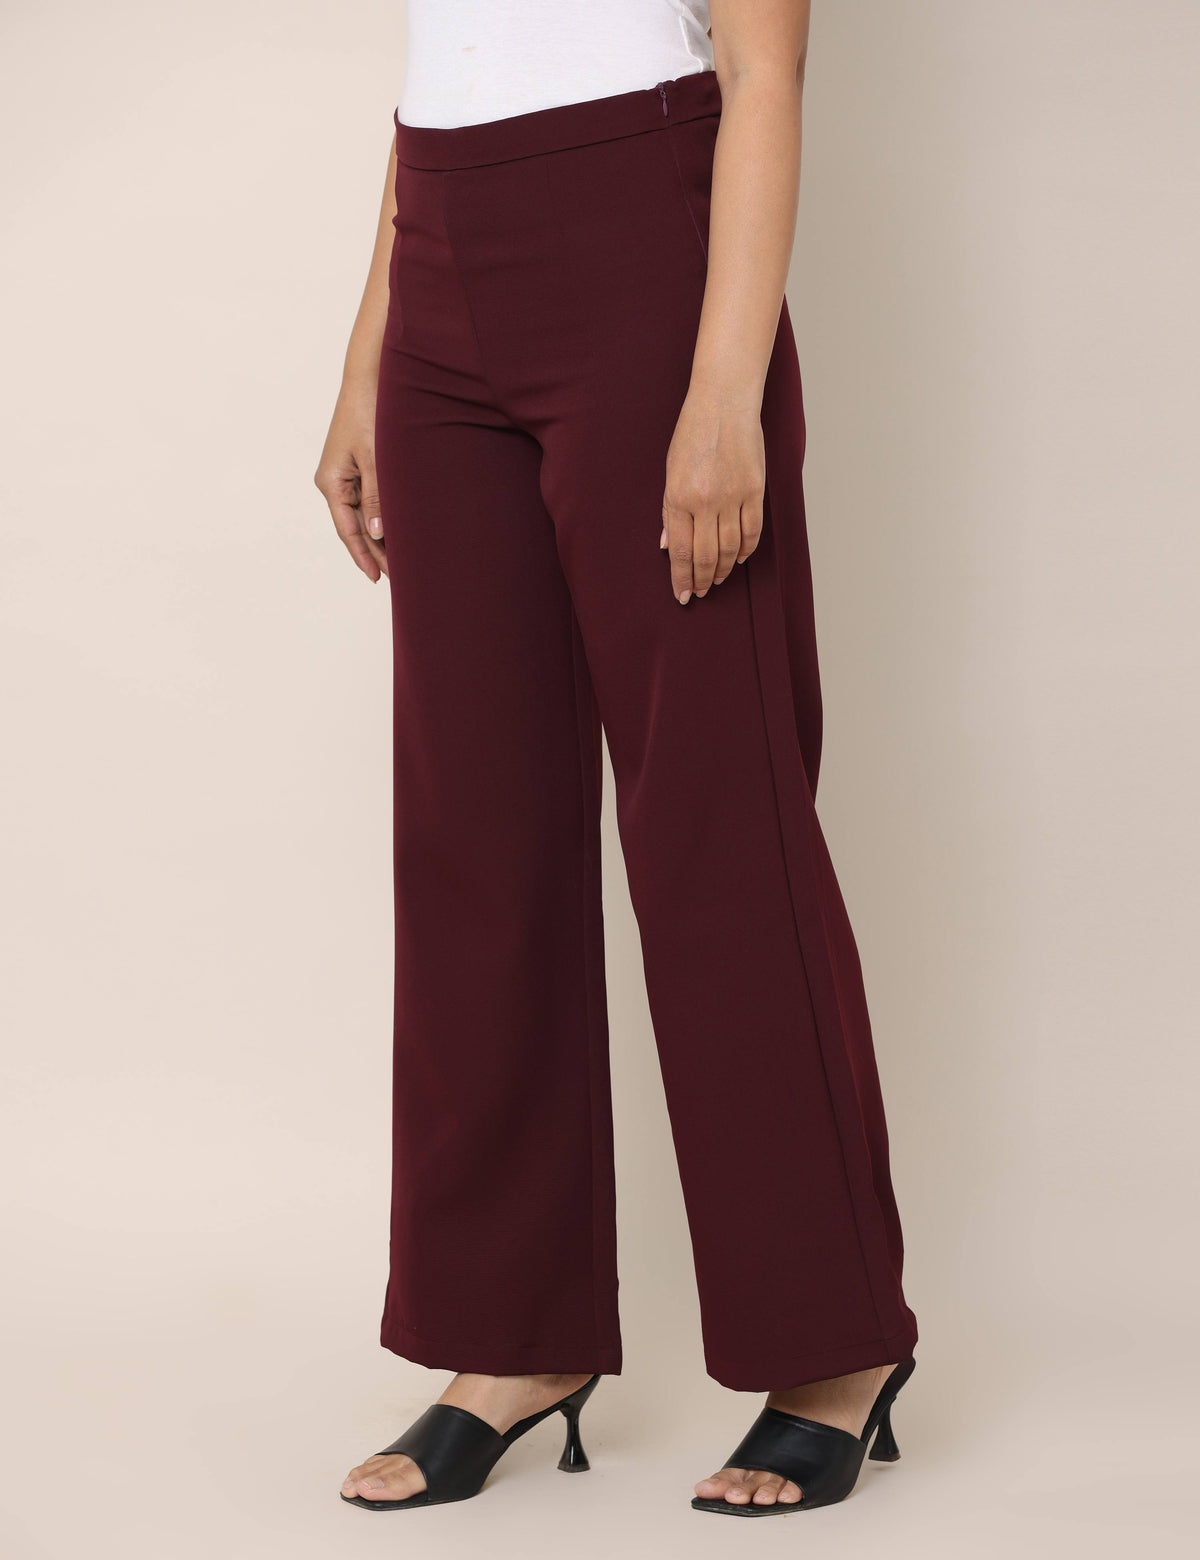 What colors go well with burgundy pants  Quora